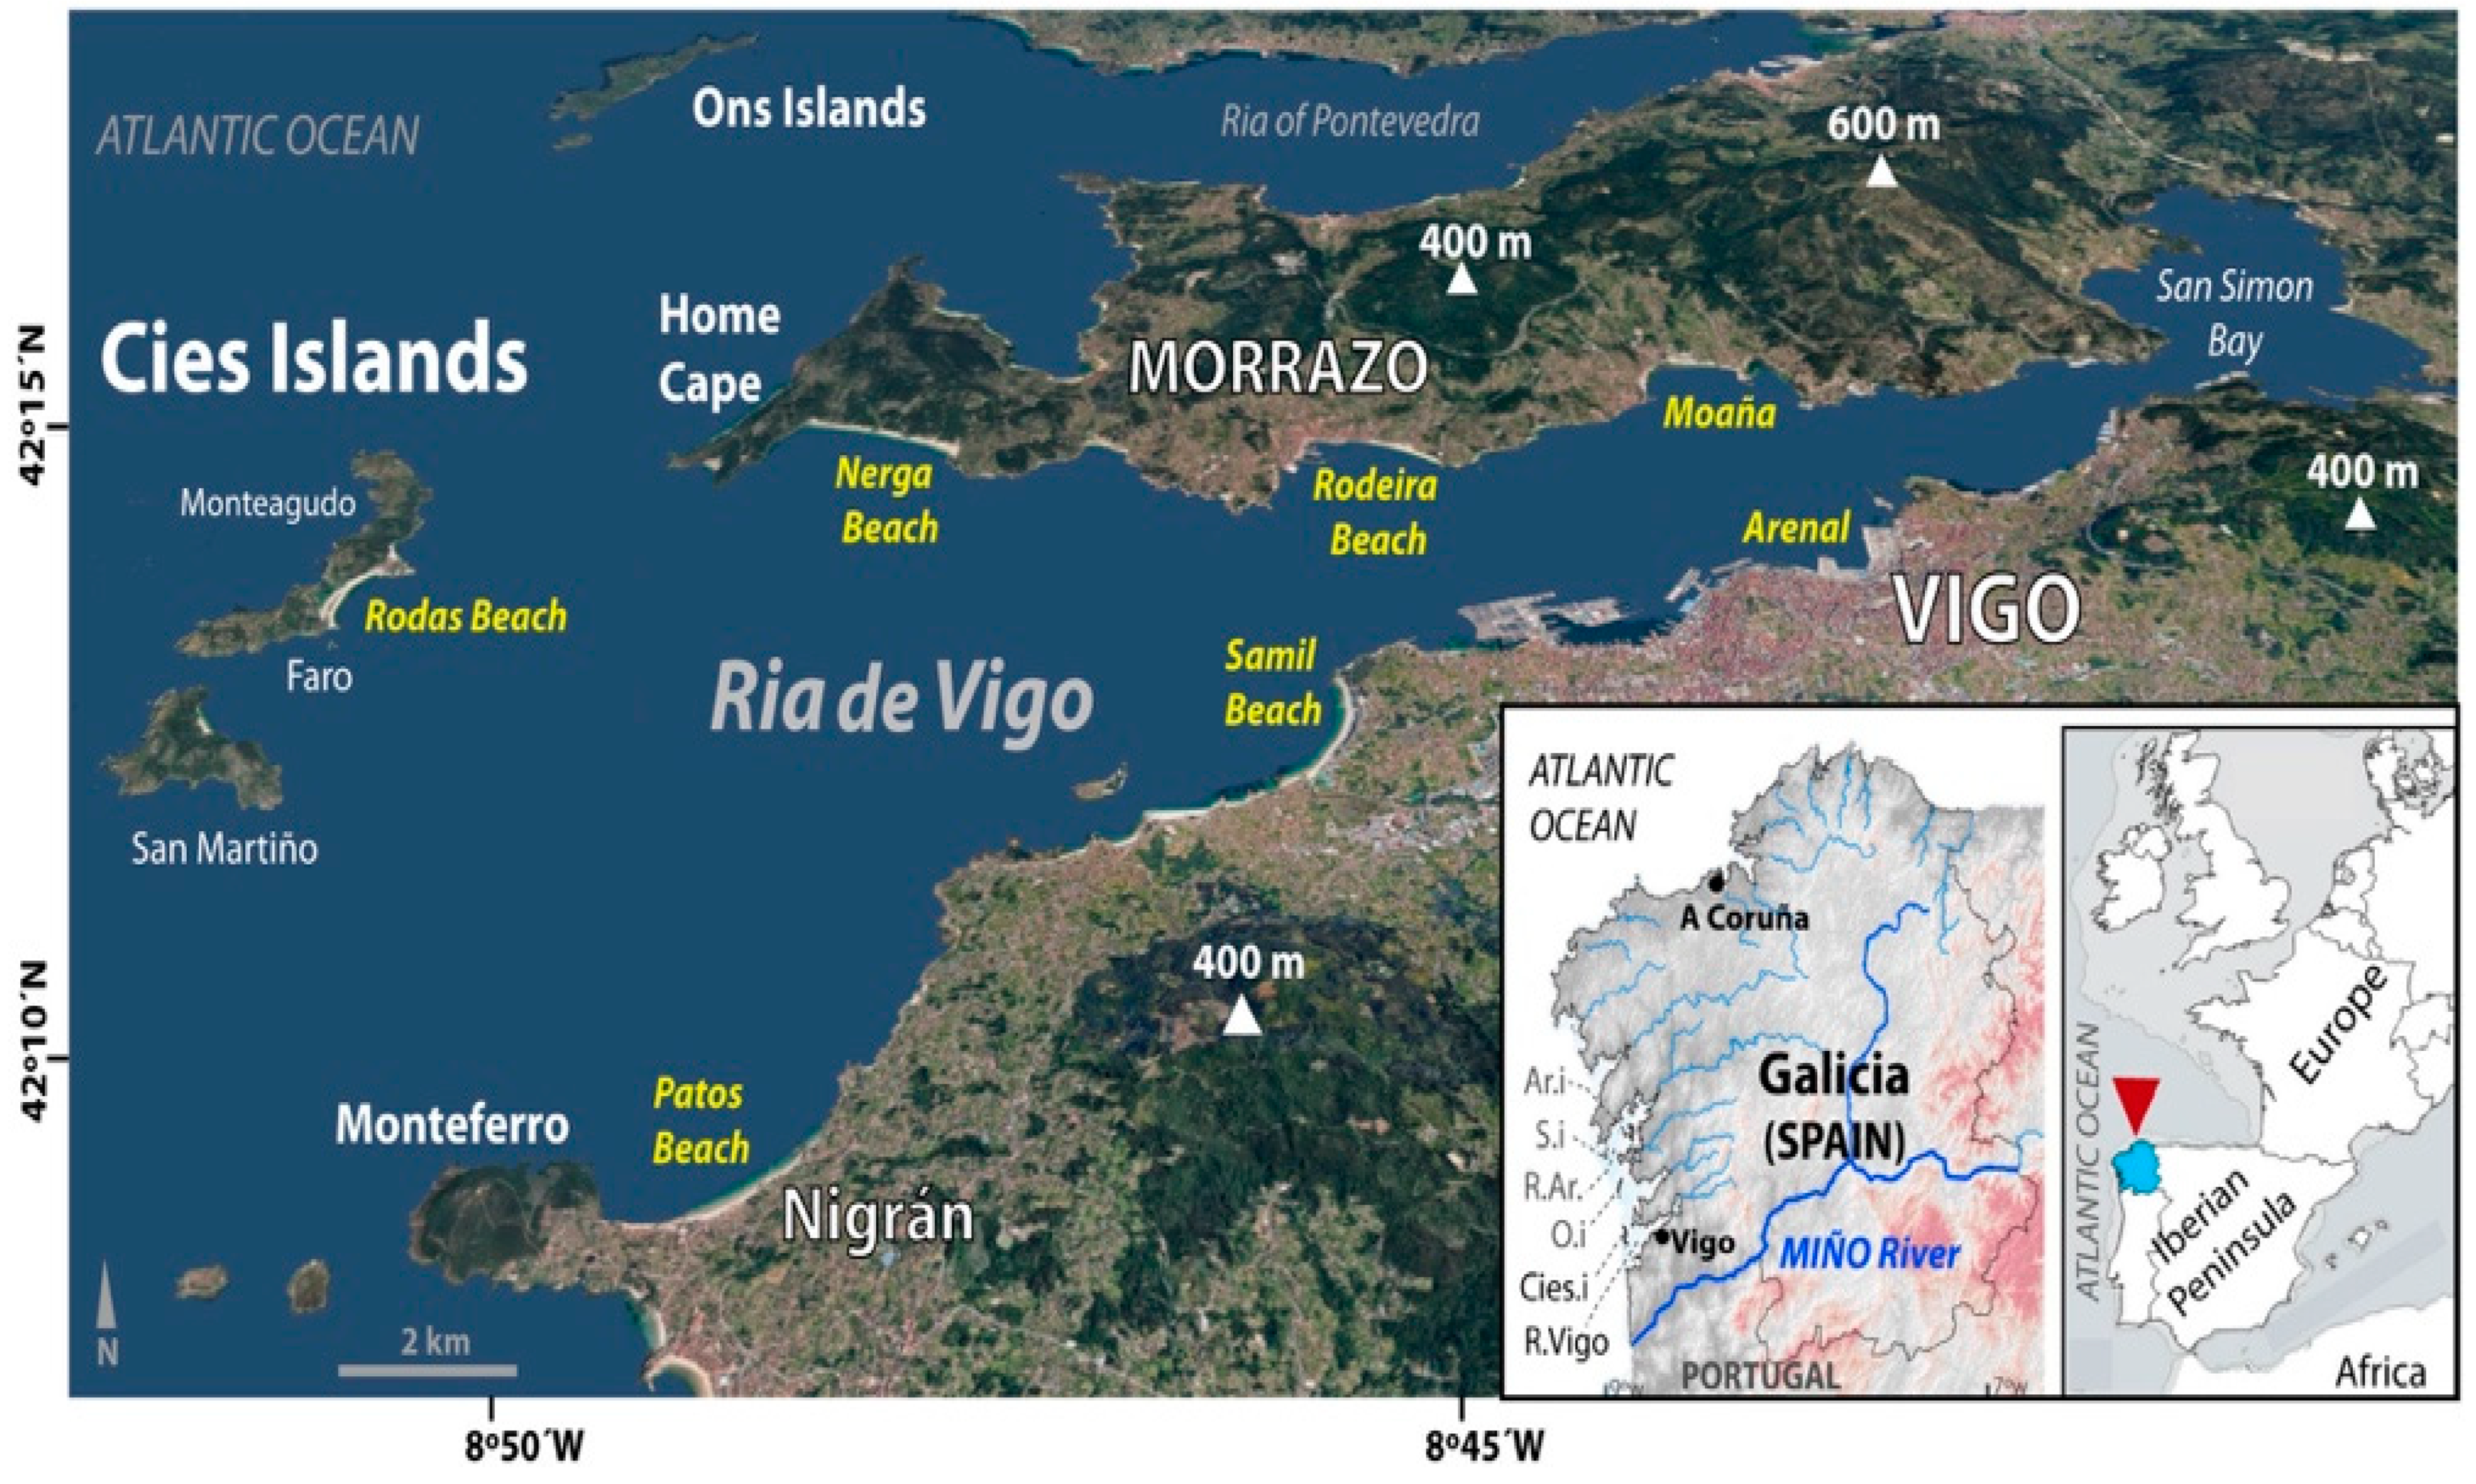 JMSE | Free Full-Text | New Model of Coastal Evolution in the Ria de Vigo  (NW Spain) from MIS2 to Present Day Based on the Aeolian Sedimentary Record